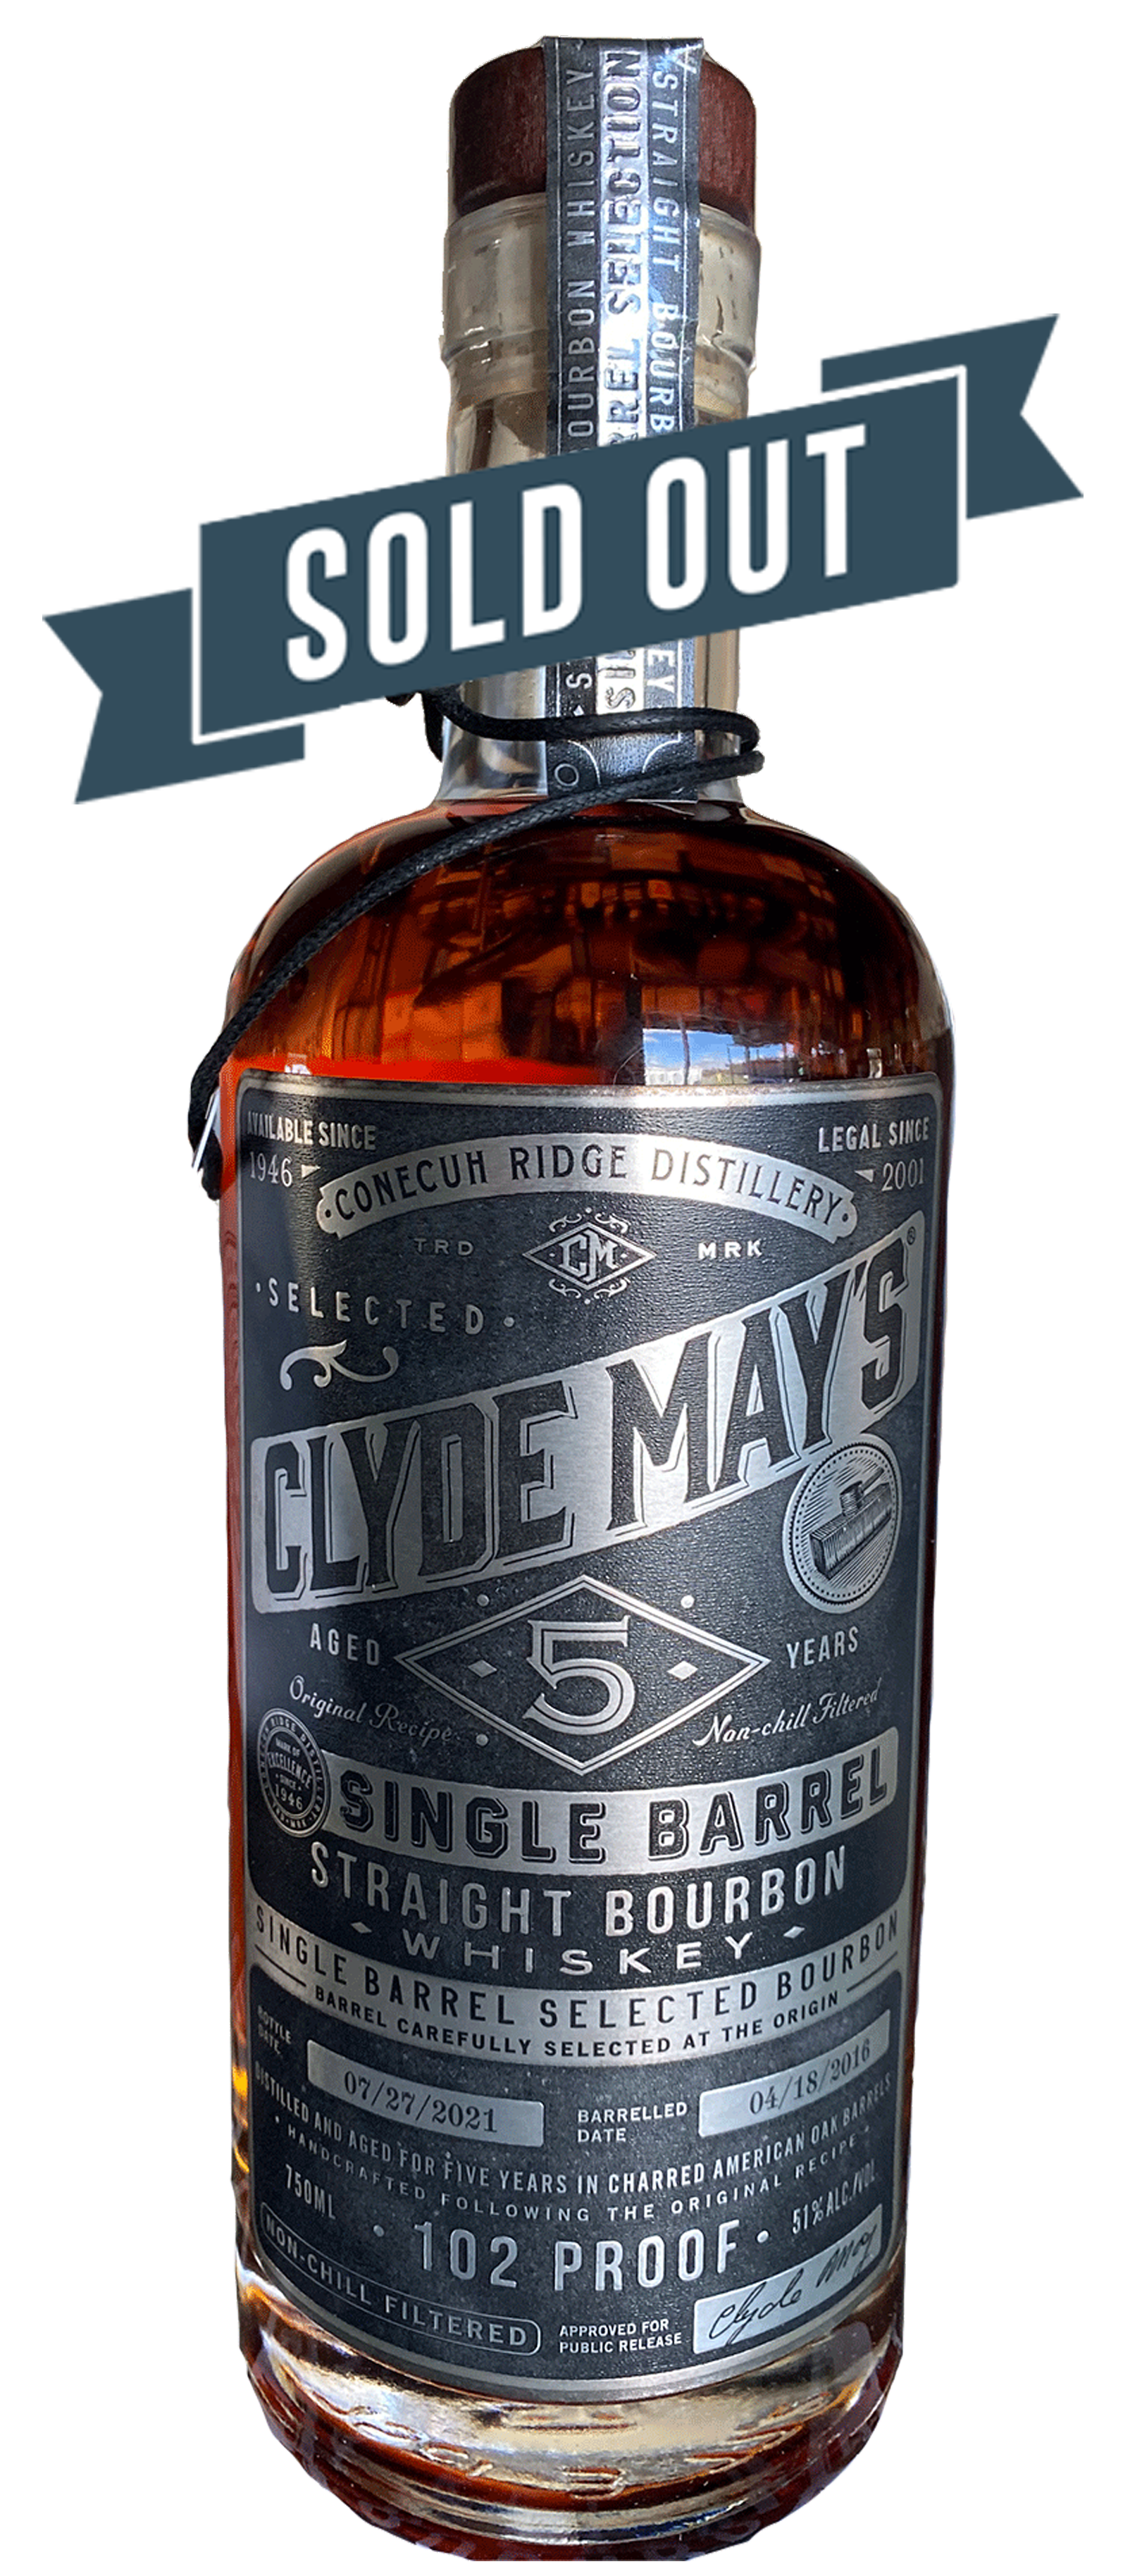 Clyde May’s Single Barrel Straight Bourbon Whiskey